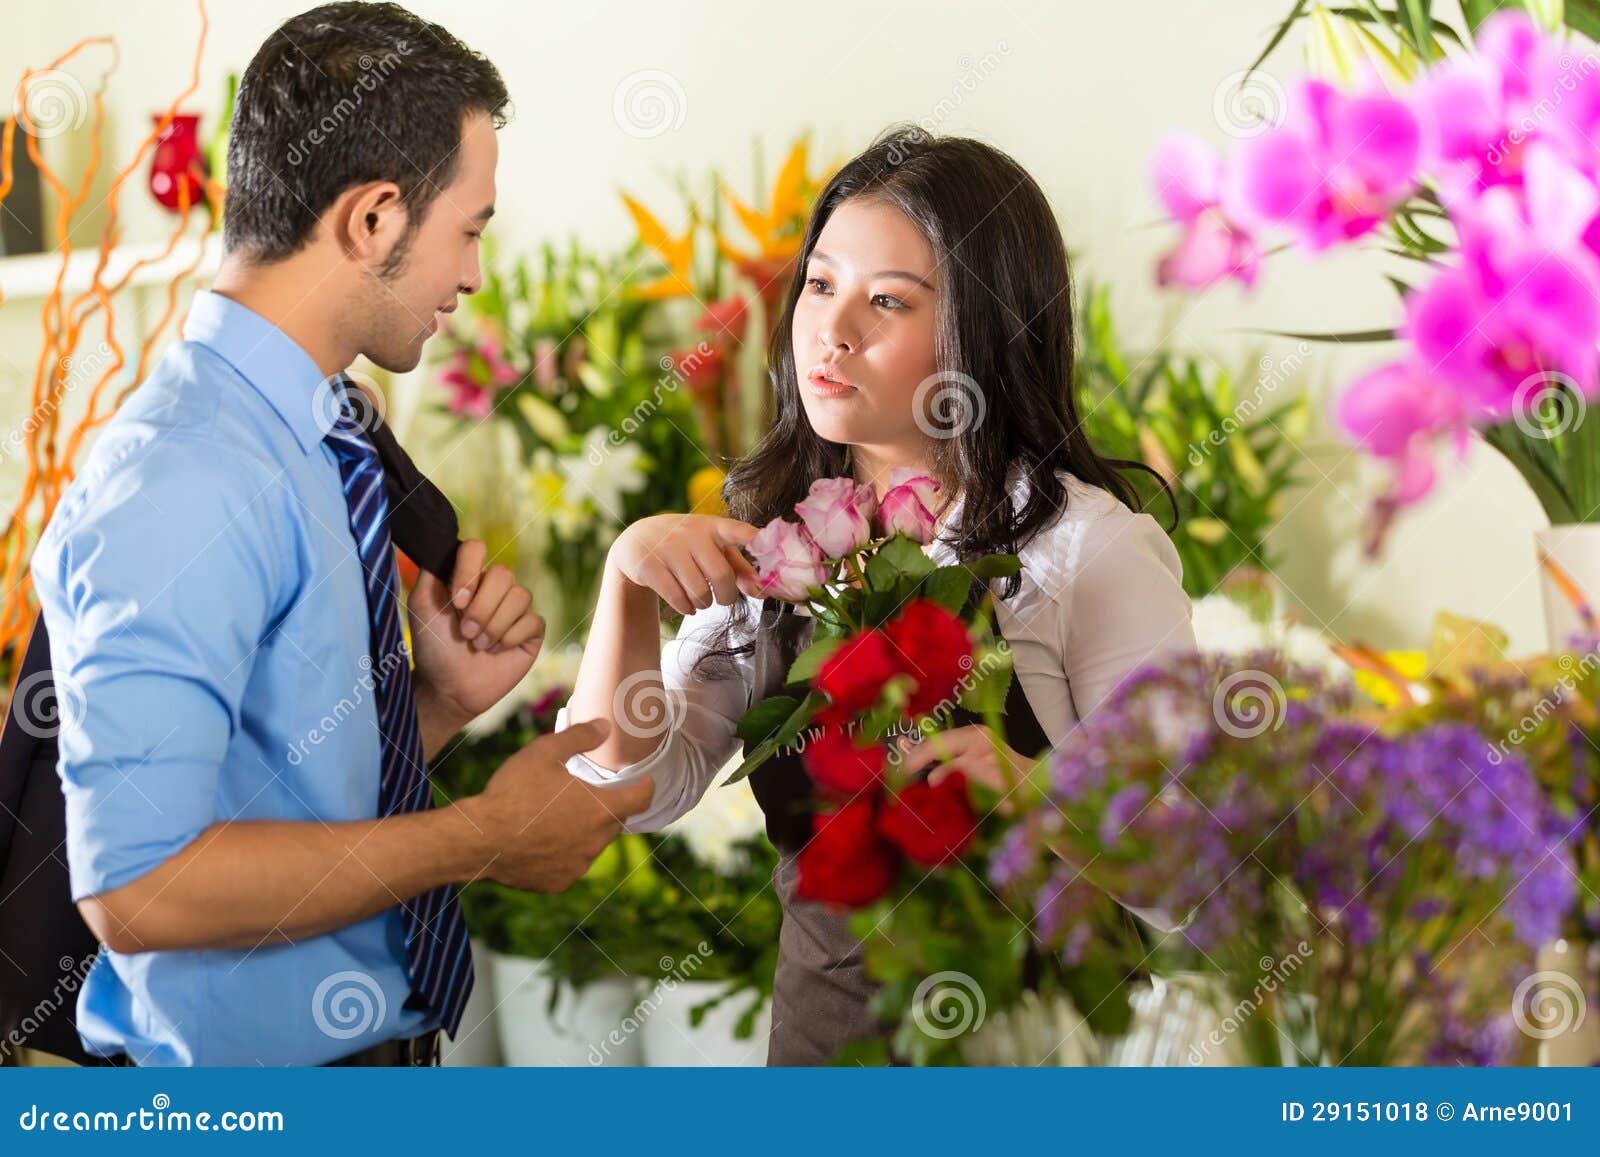 saleswoman and customer in flower shop